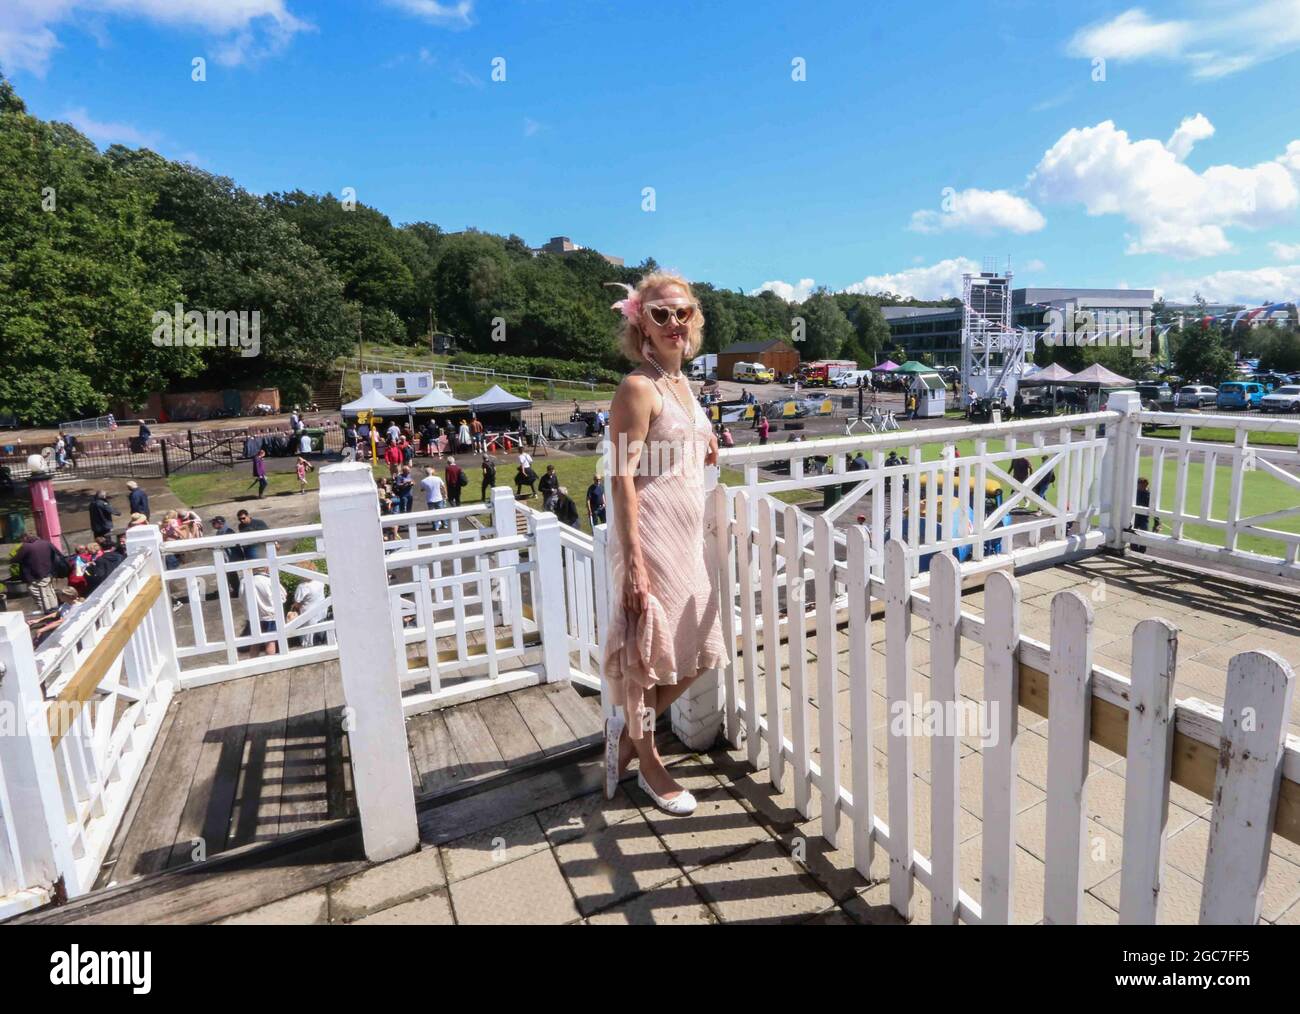 Weybridge,  UK. 07 August 2021  Step back in time to celebrate  exactly 95 years after the first   British Grand Prix was staged in Brookland,with music from the Hot Jazz Vagabounds and their wonderul dressed lead singer in her 20 attire  .Paul Quezada-Neiman/Alamy Live News Stock Photo